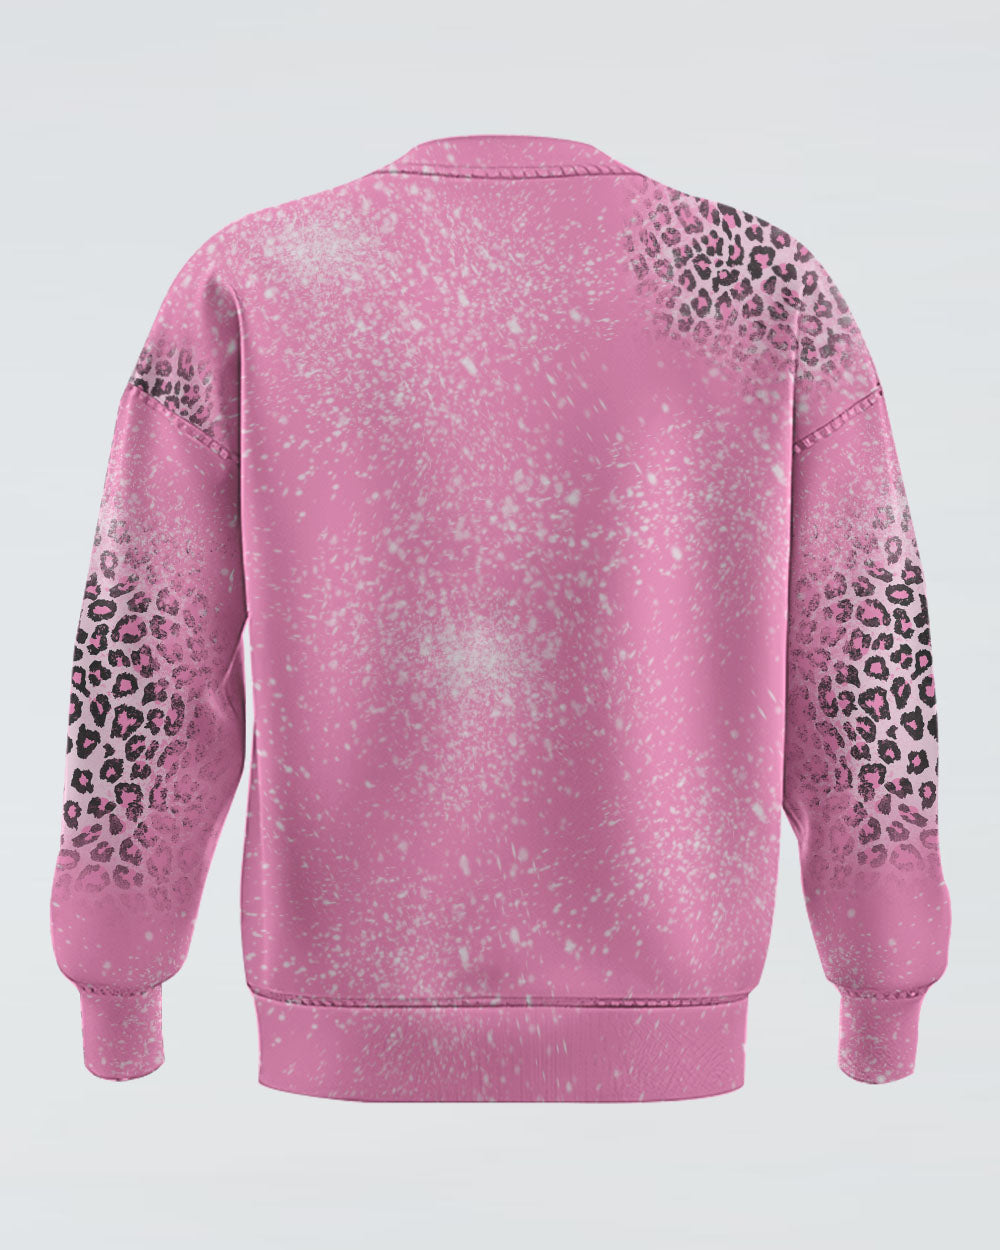 Fight For A Cure Pink Leopard Beached Women's Breast Cancer Awareness Sweatshirt